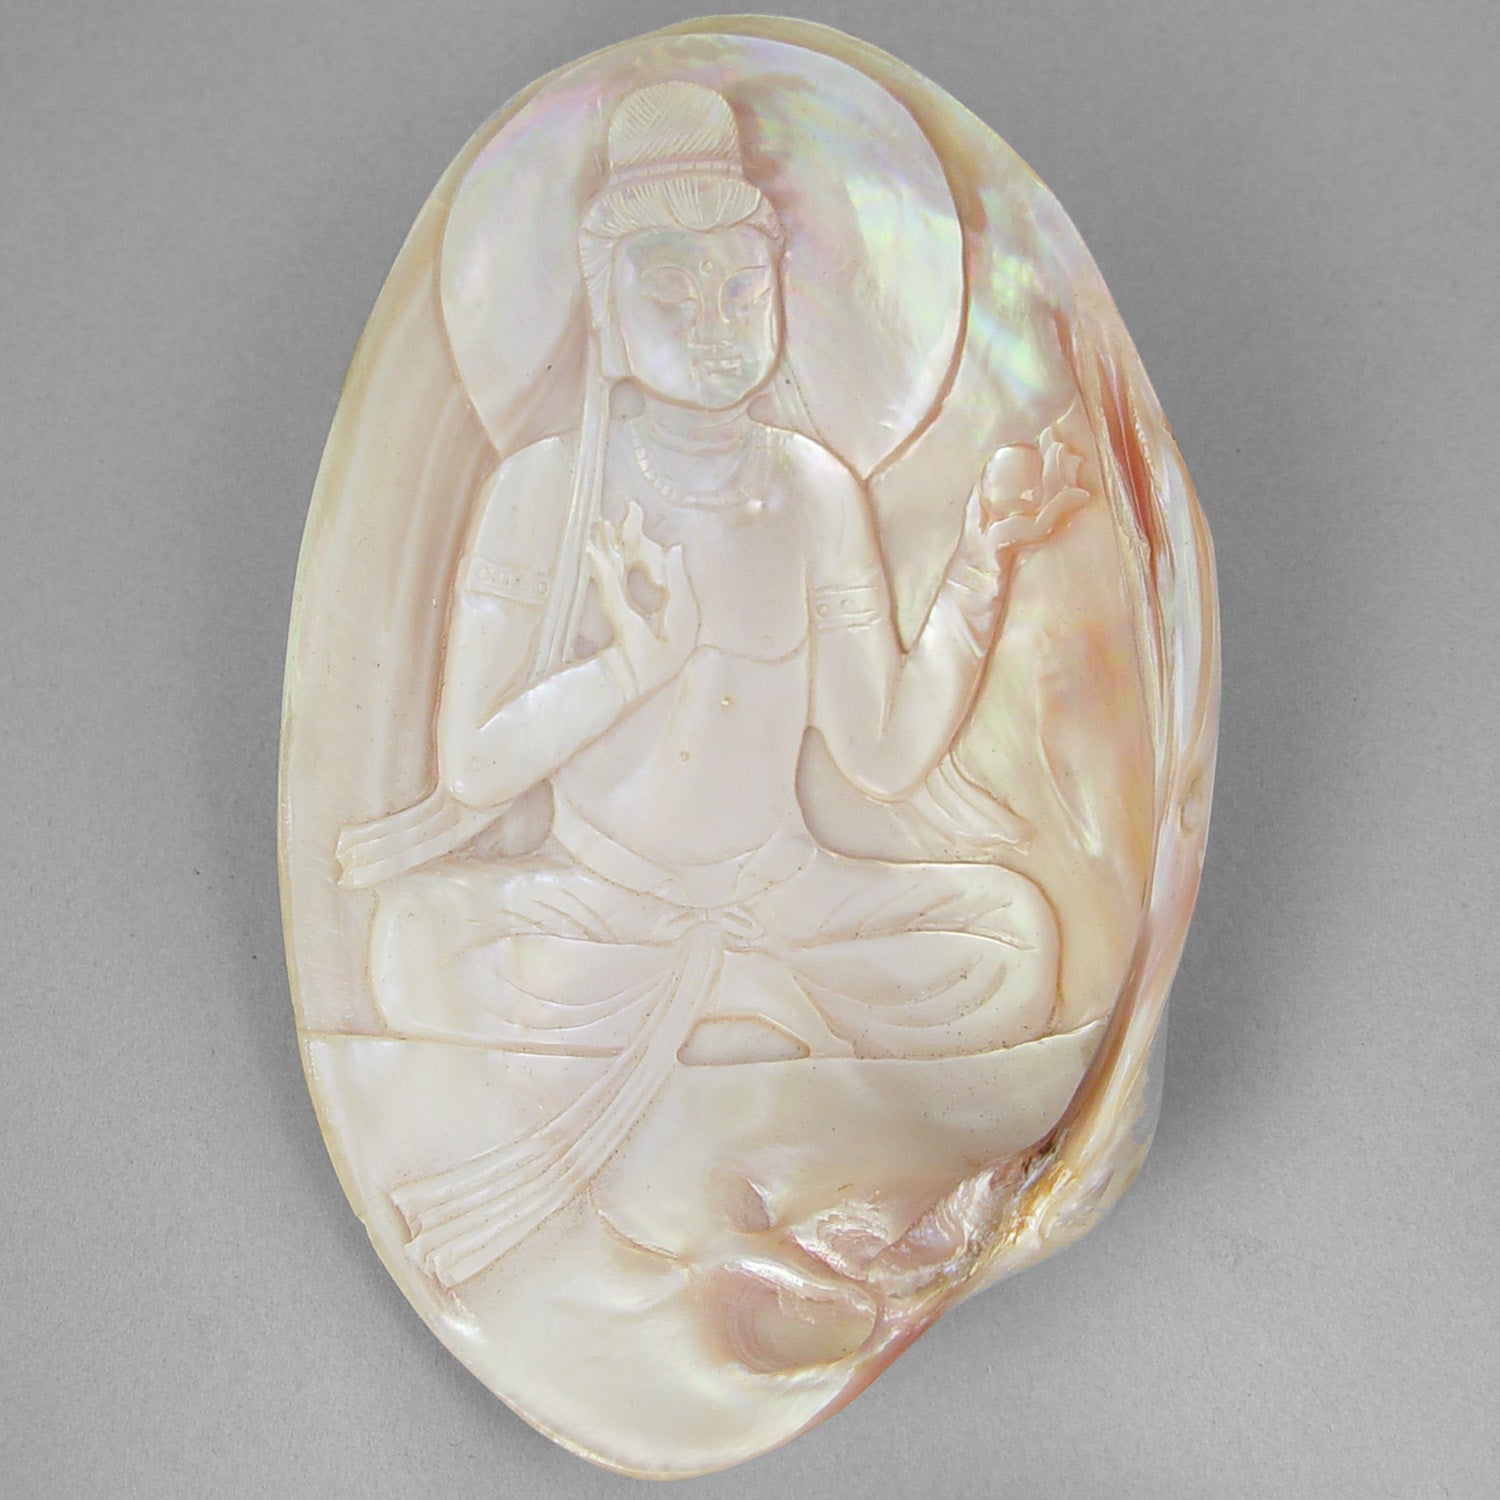 Mother of Pearl Bodhisattva Carved on Pink Mollusk Shell